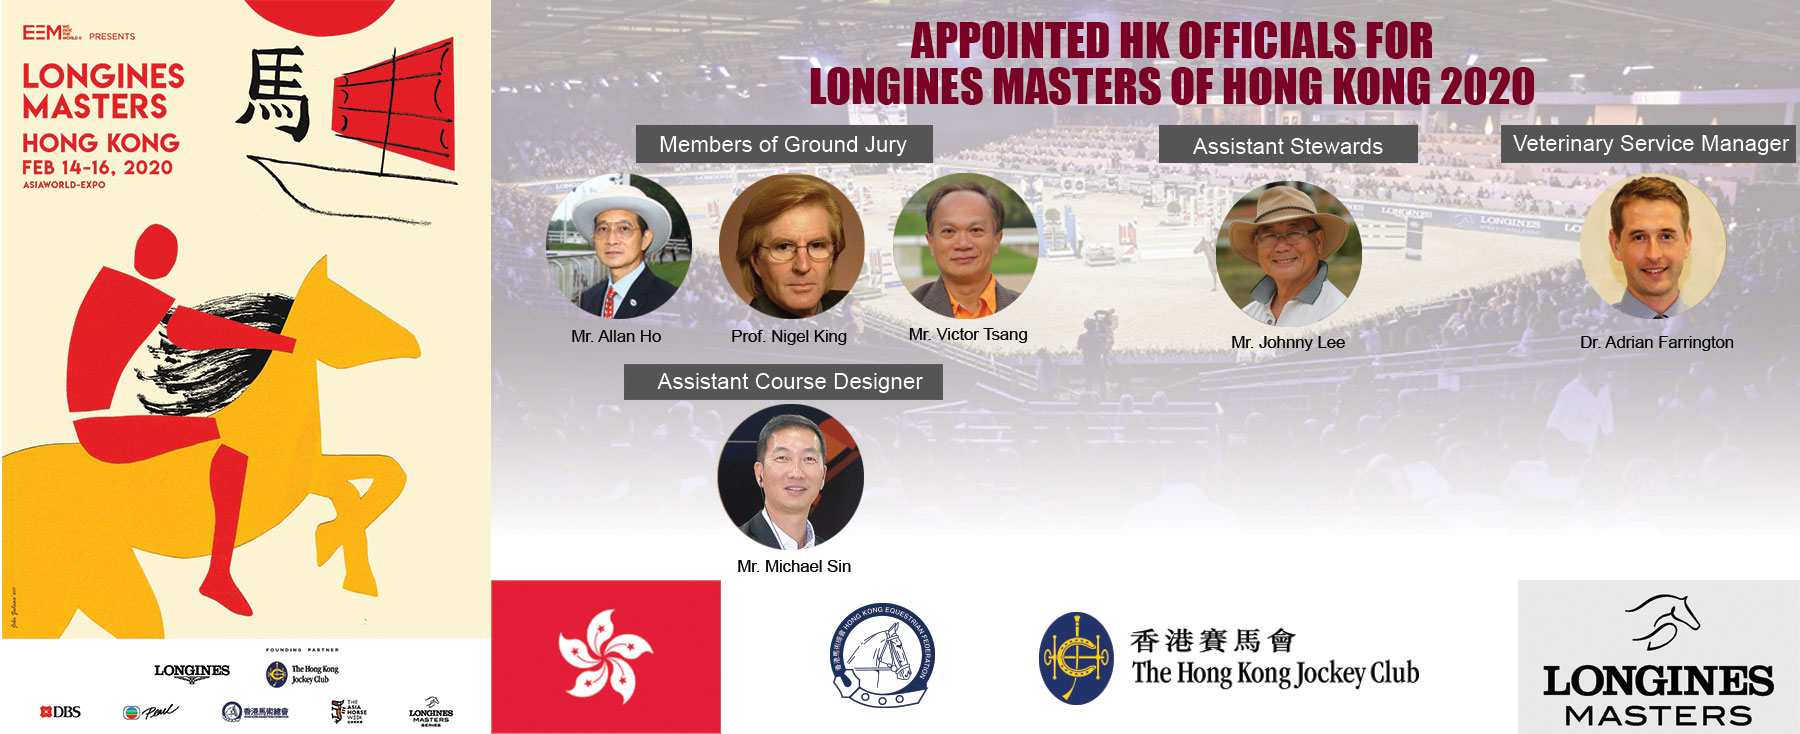 appointed-hk-officials-as-3Jan20201